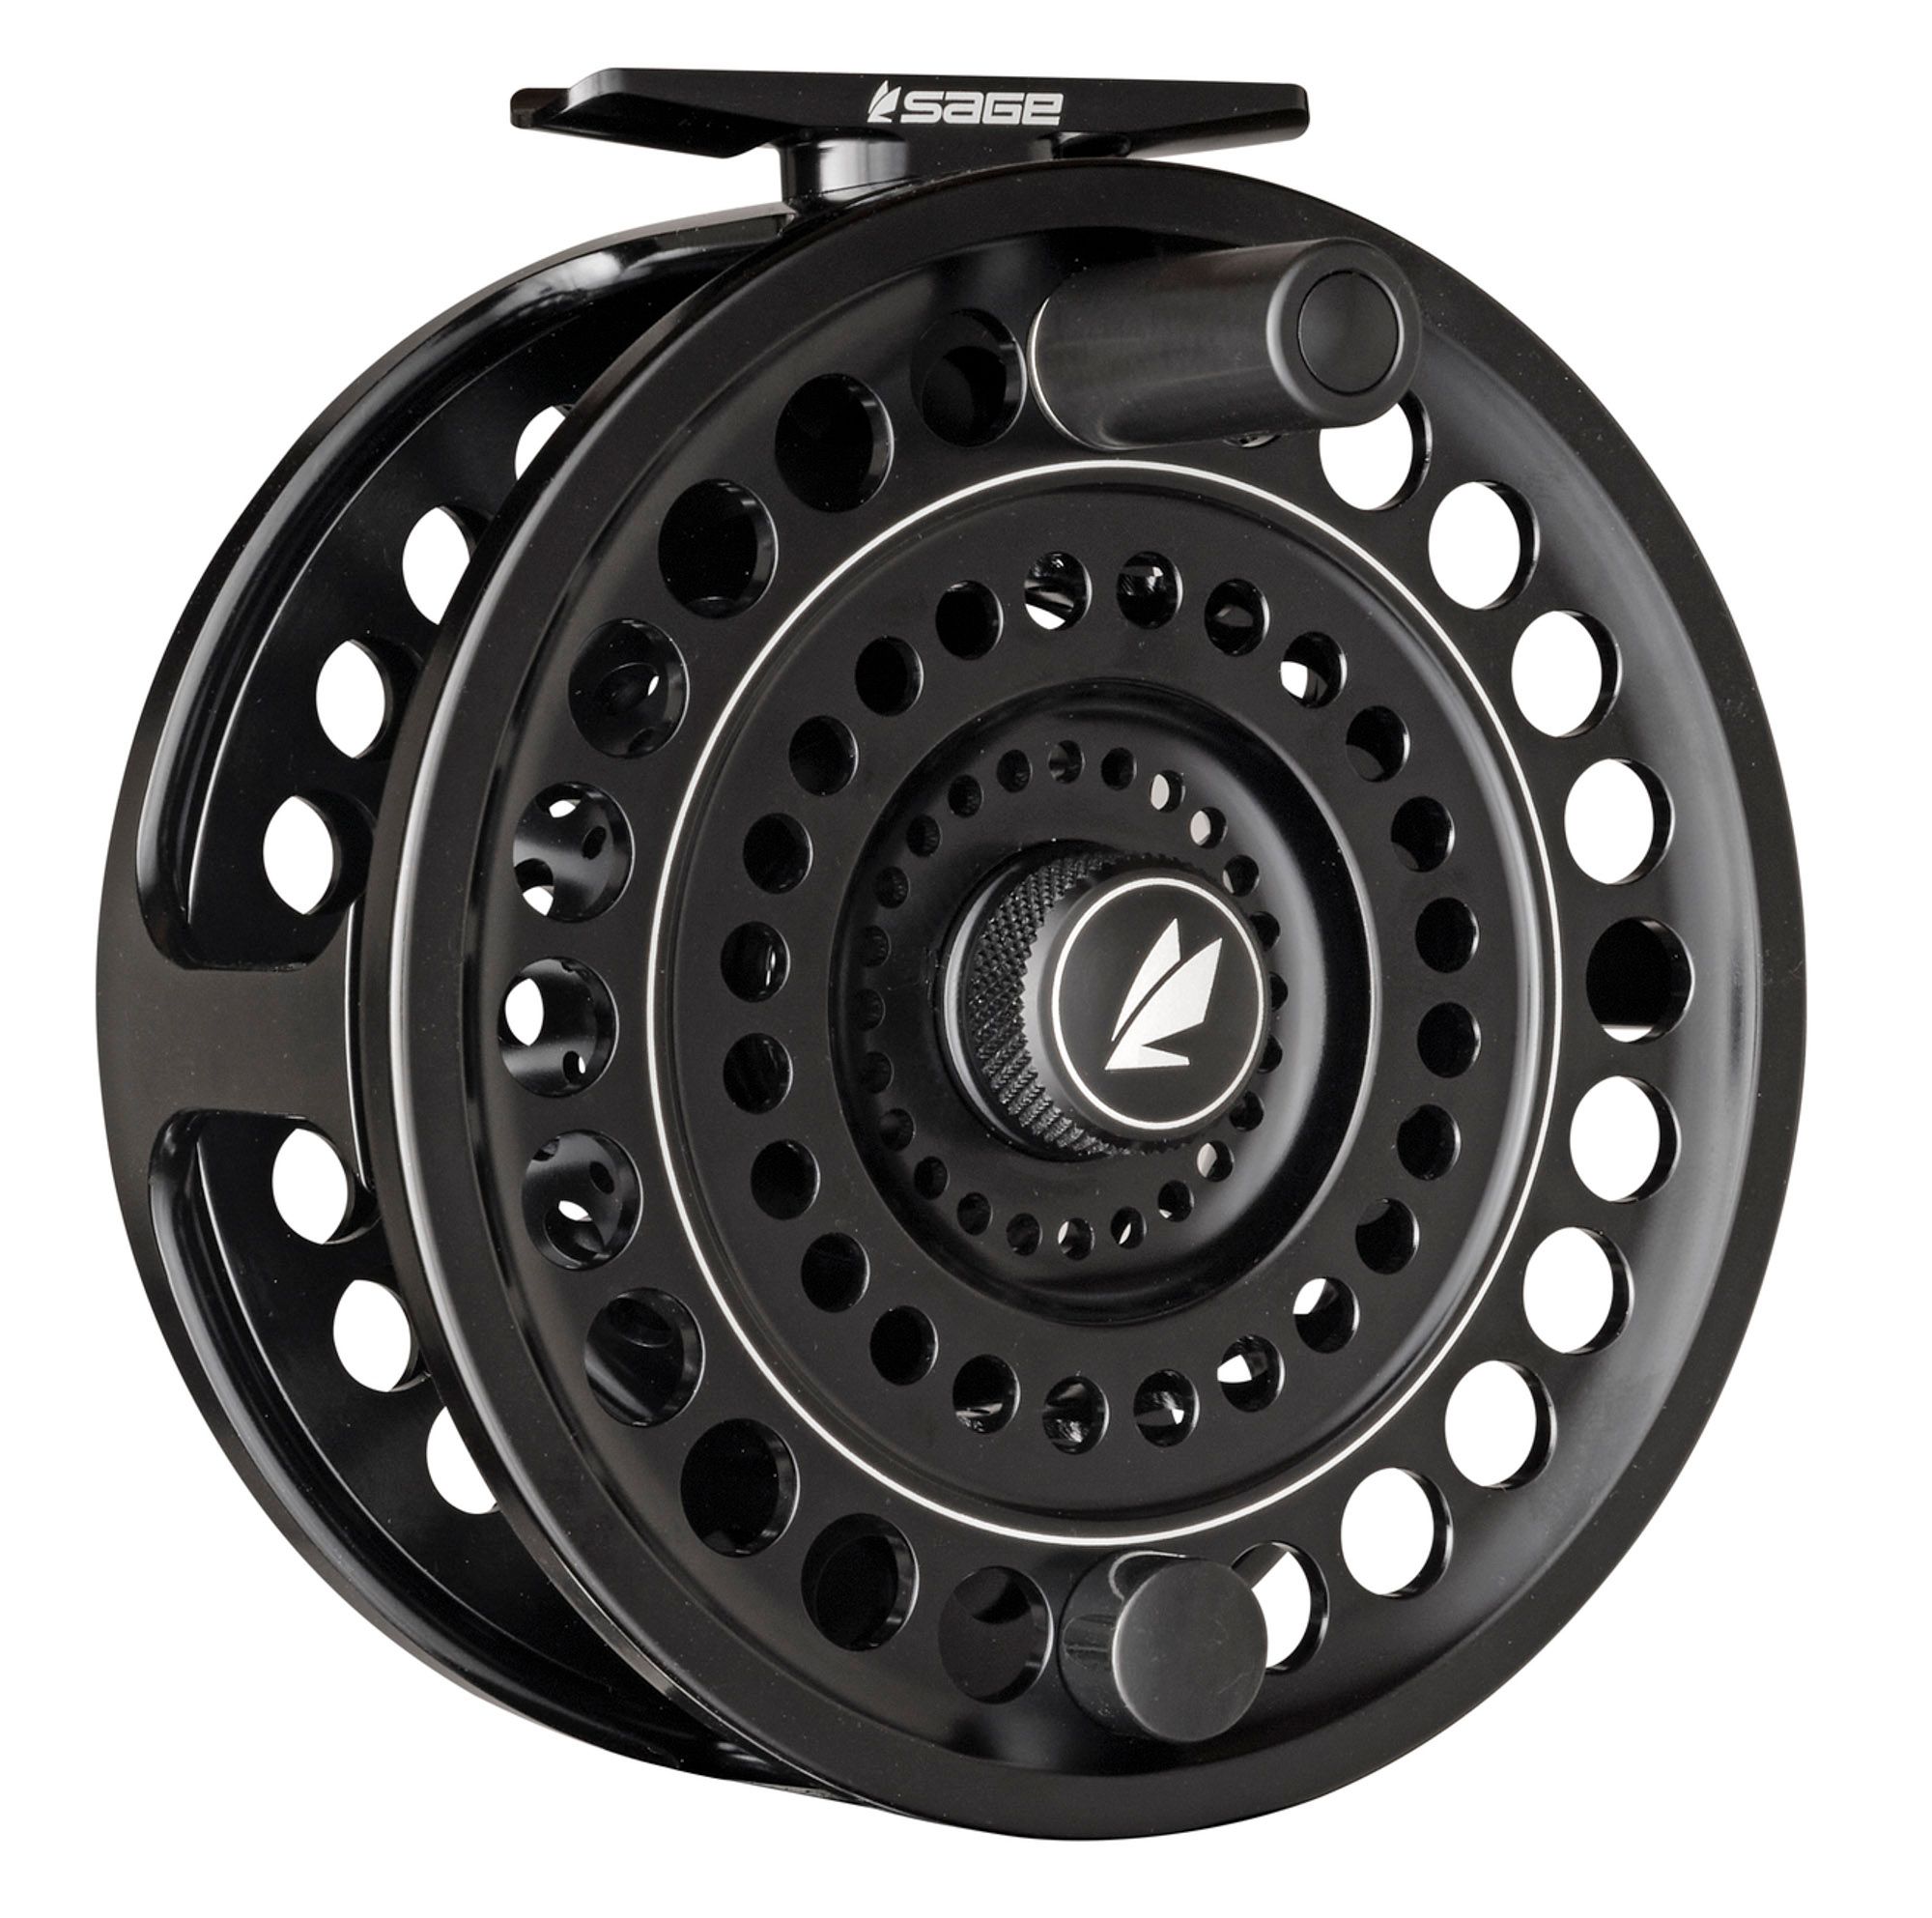 Sage Spey II Fly Reel - Fin & Game